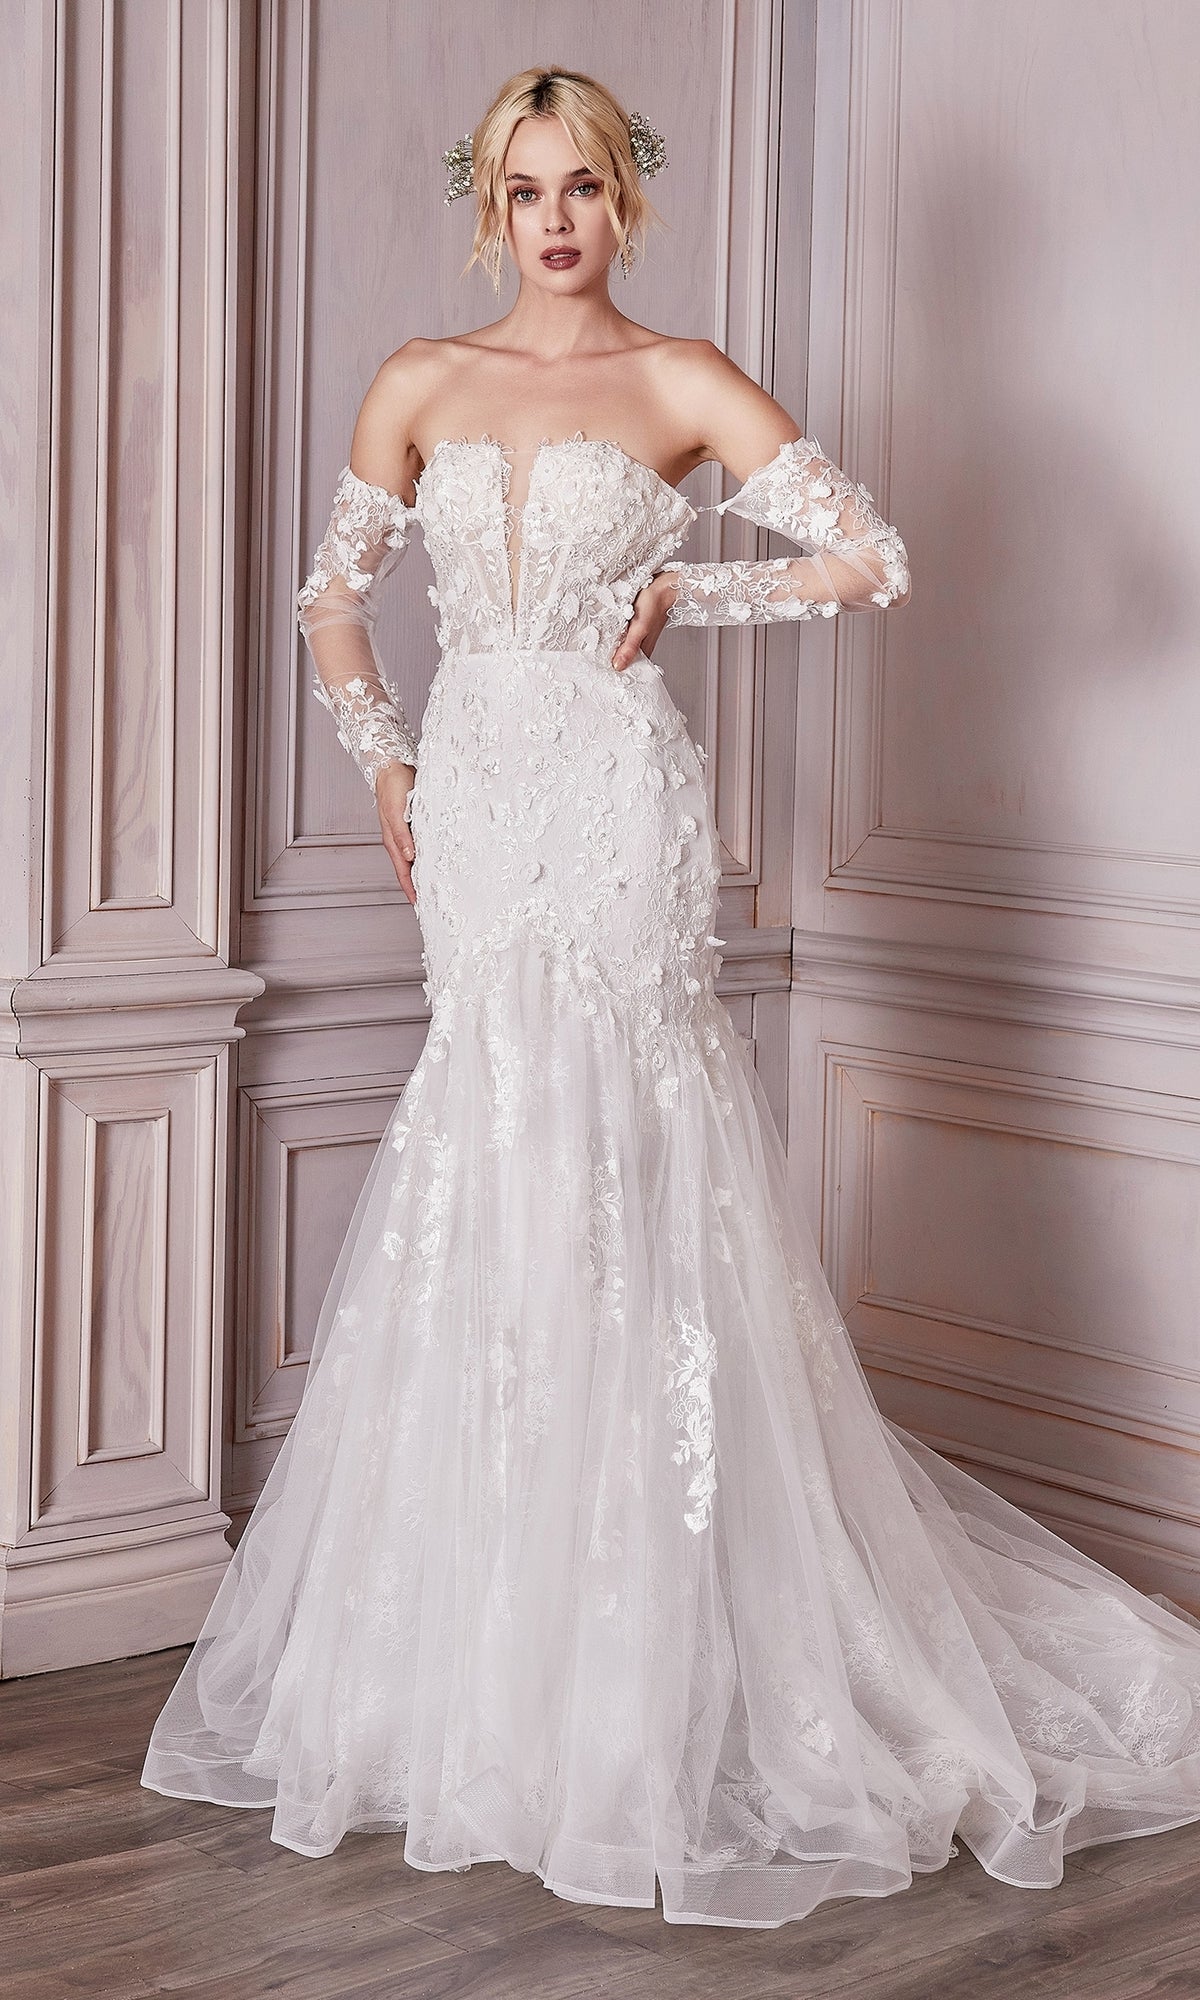 Long White Strapless Bridal Gown CD977W